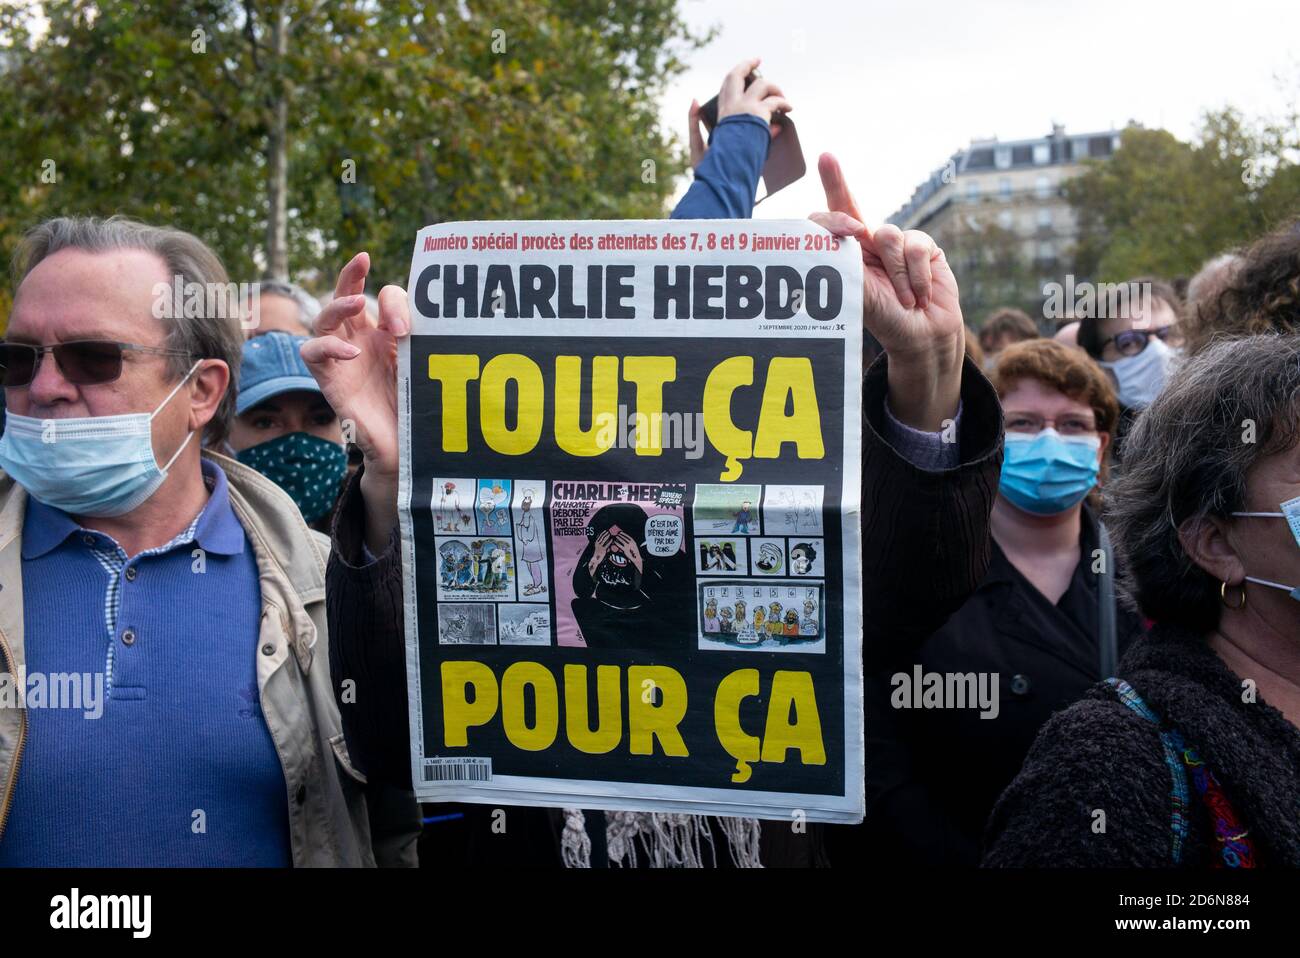 An issue of the satirical magazine, Charlie Hebdo with the headline 'All This For This' carried by a protester during the tribute.Thousands gathered at the Place de la Republique to protest and pay tribute to 47-year-old history teacher Samuel Paty, beheaded on October 16th after showing caricatures of the Prophet Muhammad in class. Stock Photo